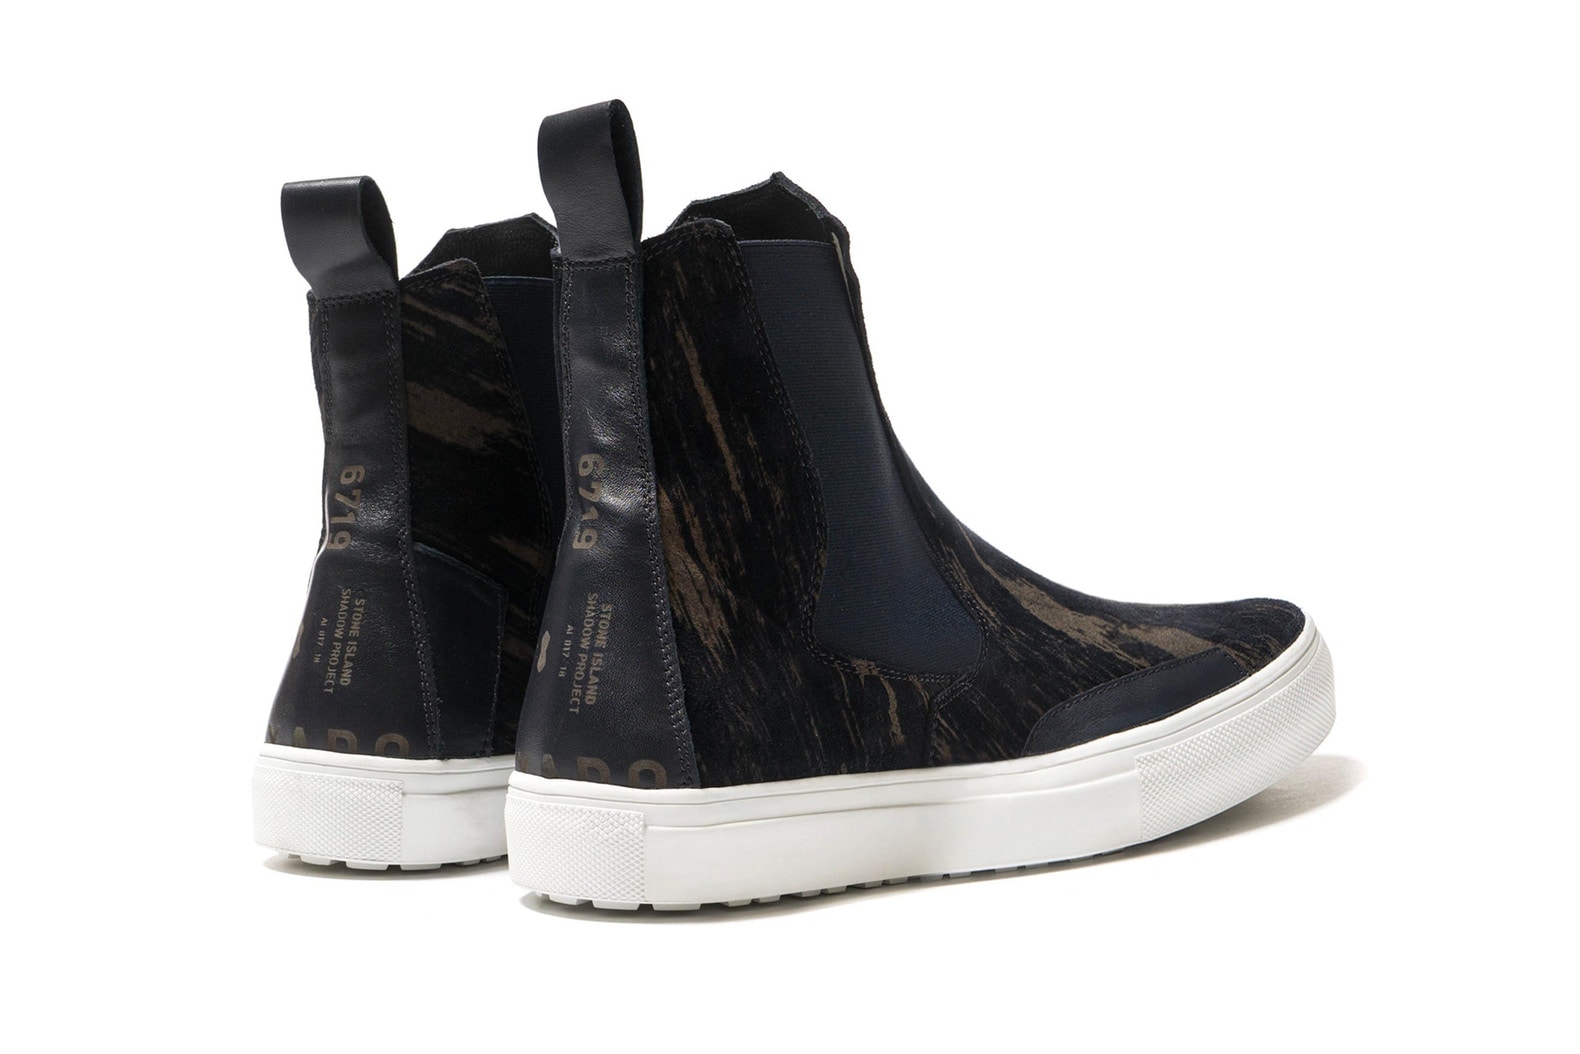 Stone Island Shadow Project "Bleu" Laser Graphic Suede Shoes